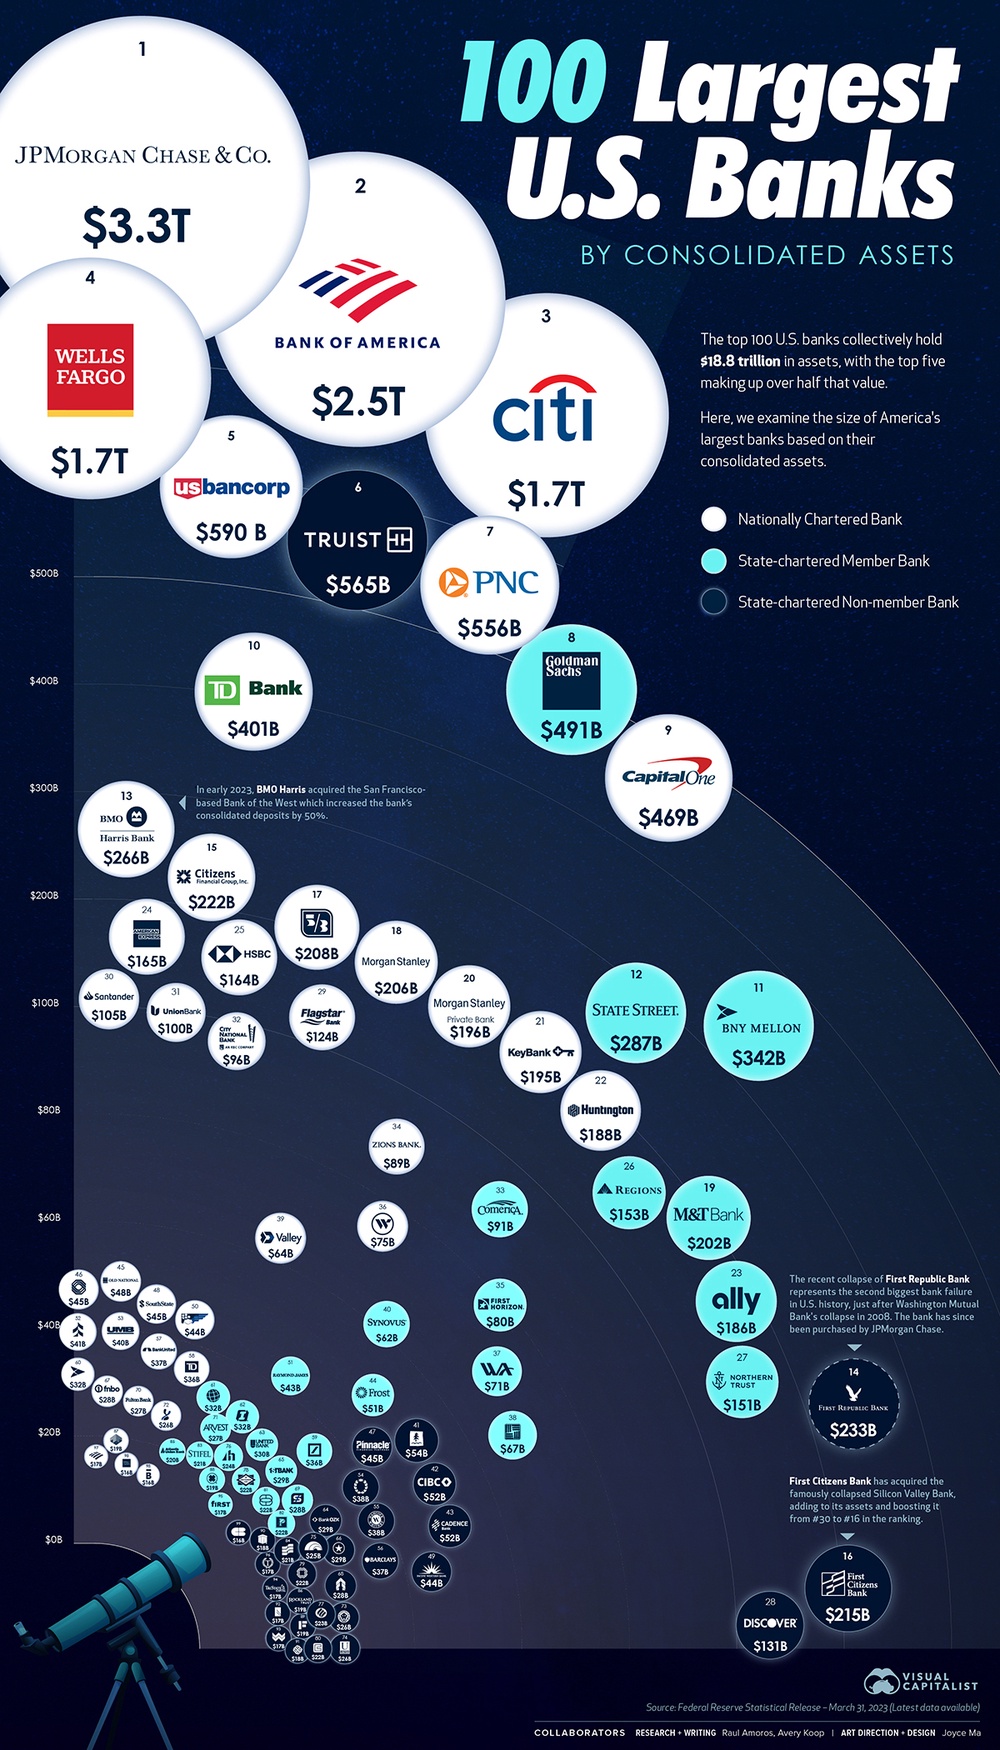 Visualized The 100 Largest U.S. Banks by Consolidated Assets